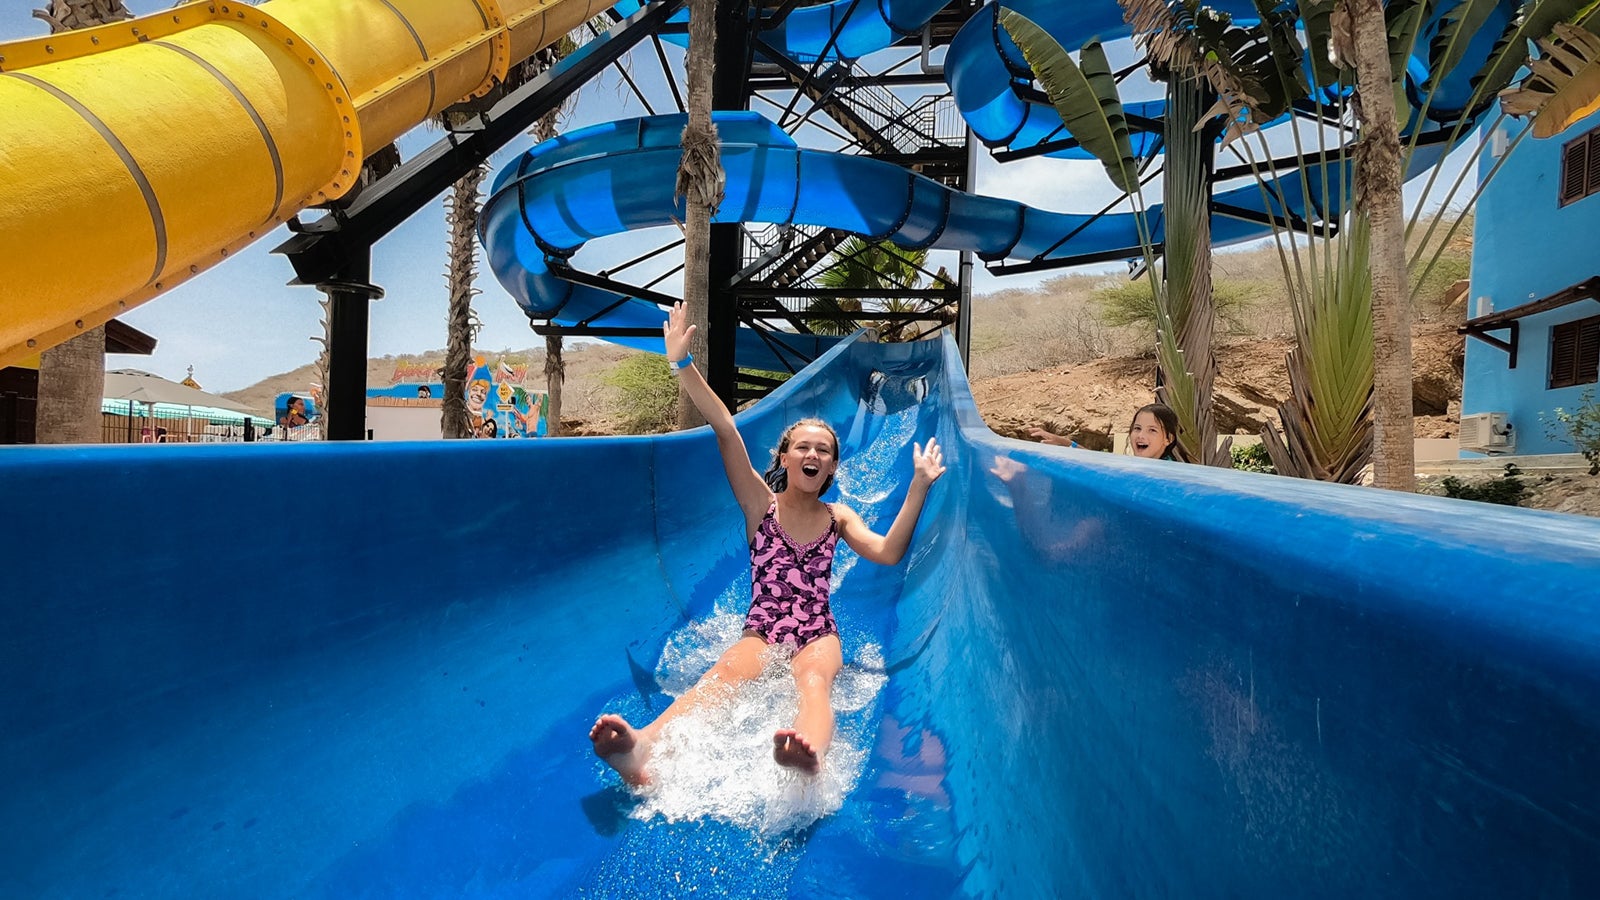 Stay at these all-inclusive resorts with water parks the kids will love